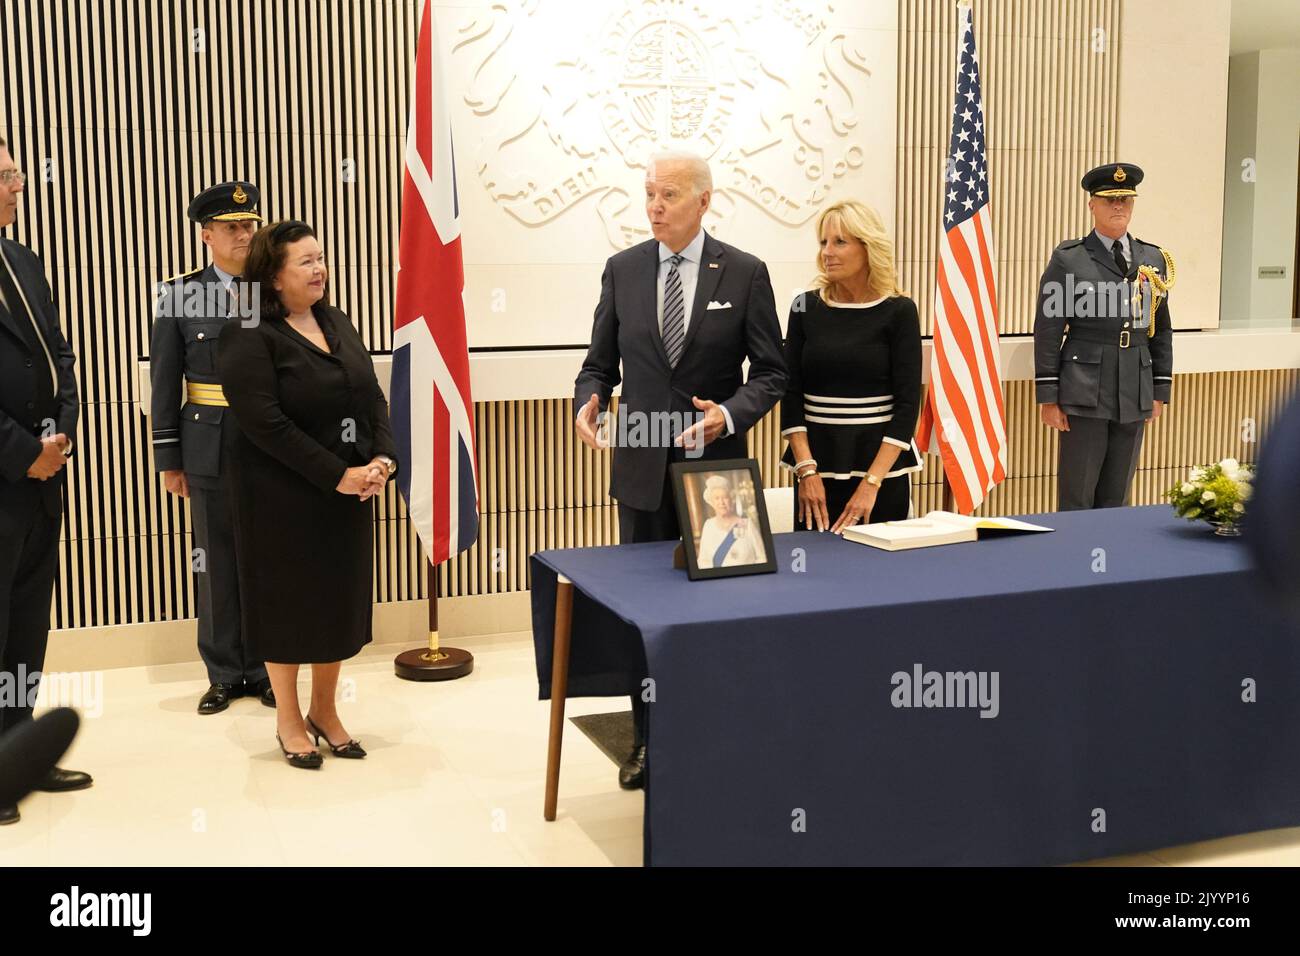 Washington, United States. 08th Sep, 2022. United States President Joe Biden and first lady Dr. Jill Biden sign the condolence book during their visit to the British Embassy in Washington, DC to pay respects following the passing of Queen Elizabeth II on Thursday, September 8, 2022. Photo by Chris Kleponis/UPI Credit: UPI/Alamy Live News Stock Photo